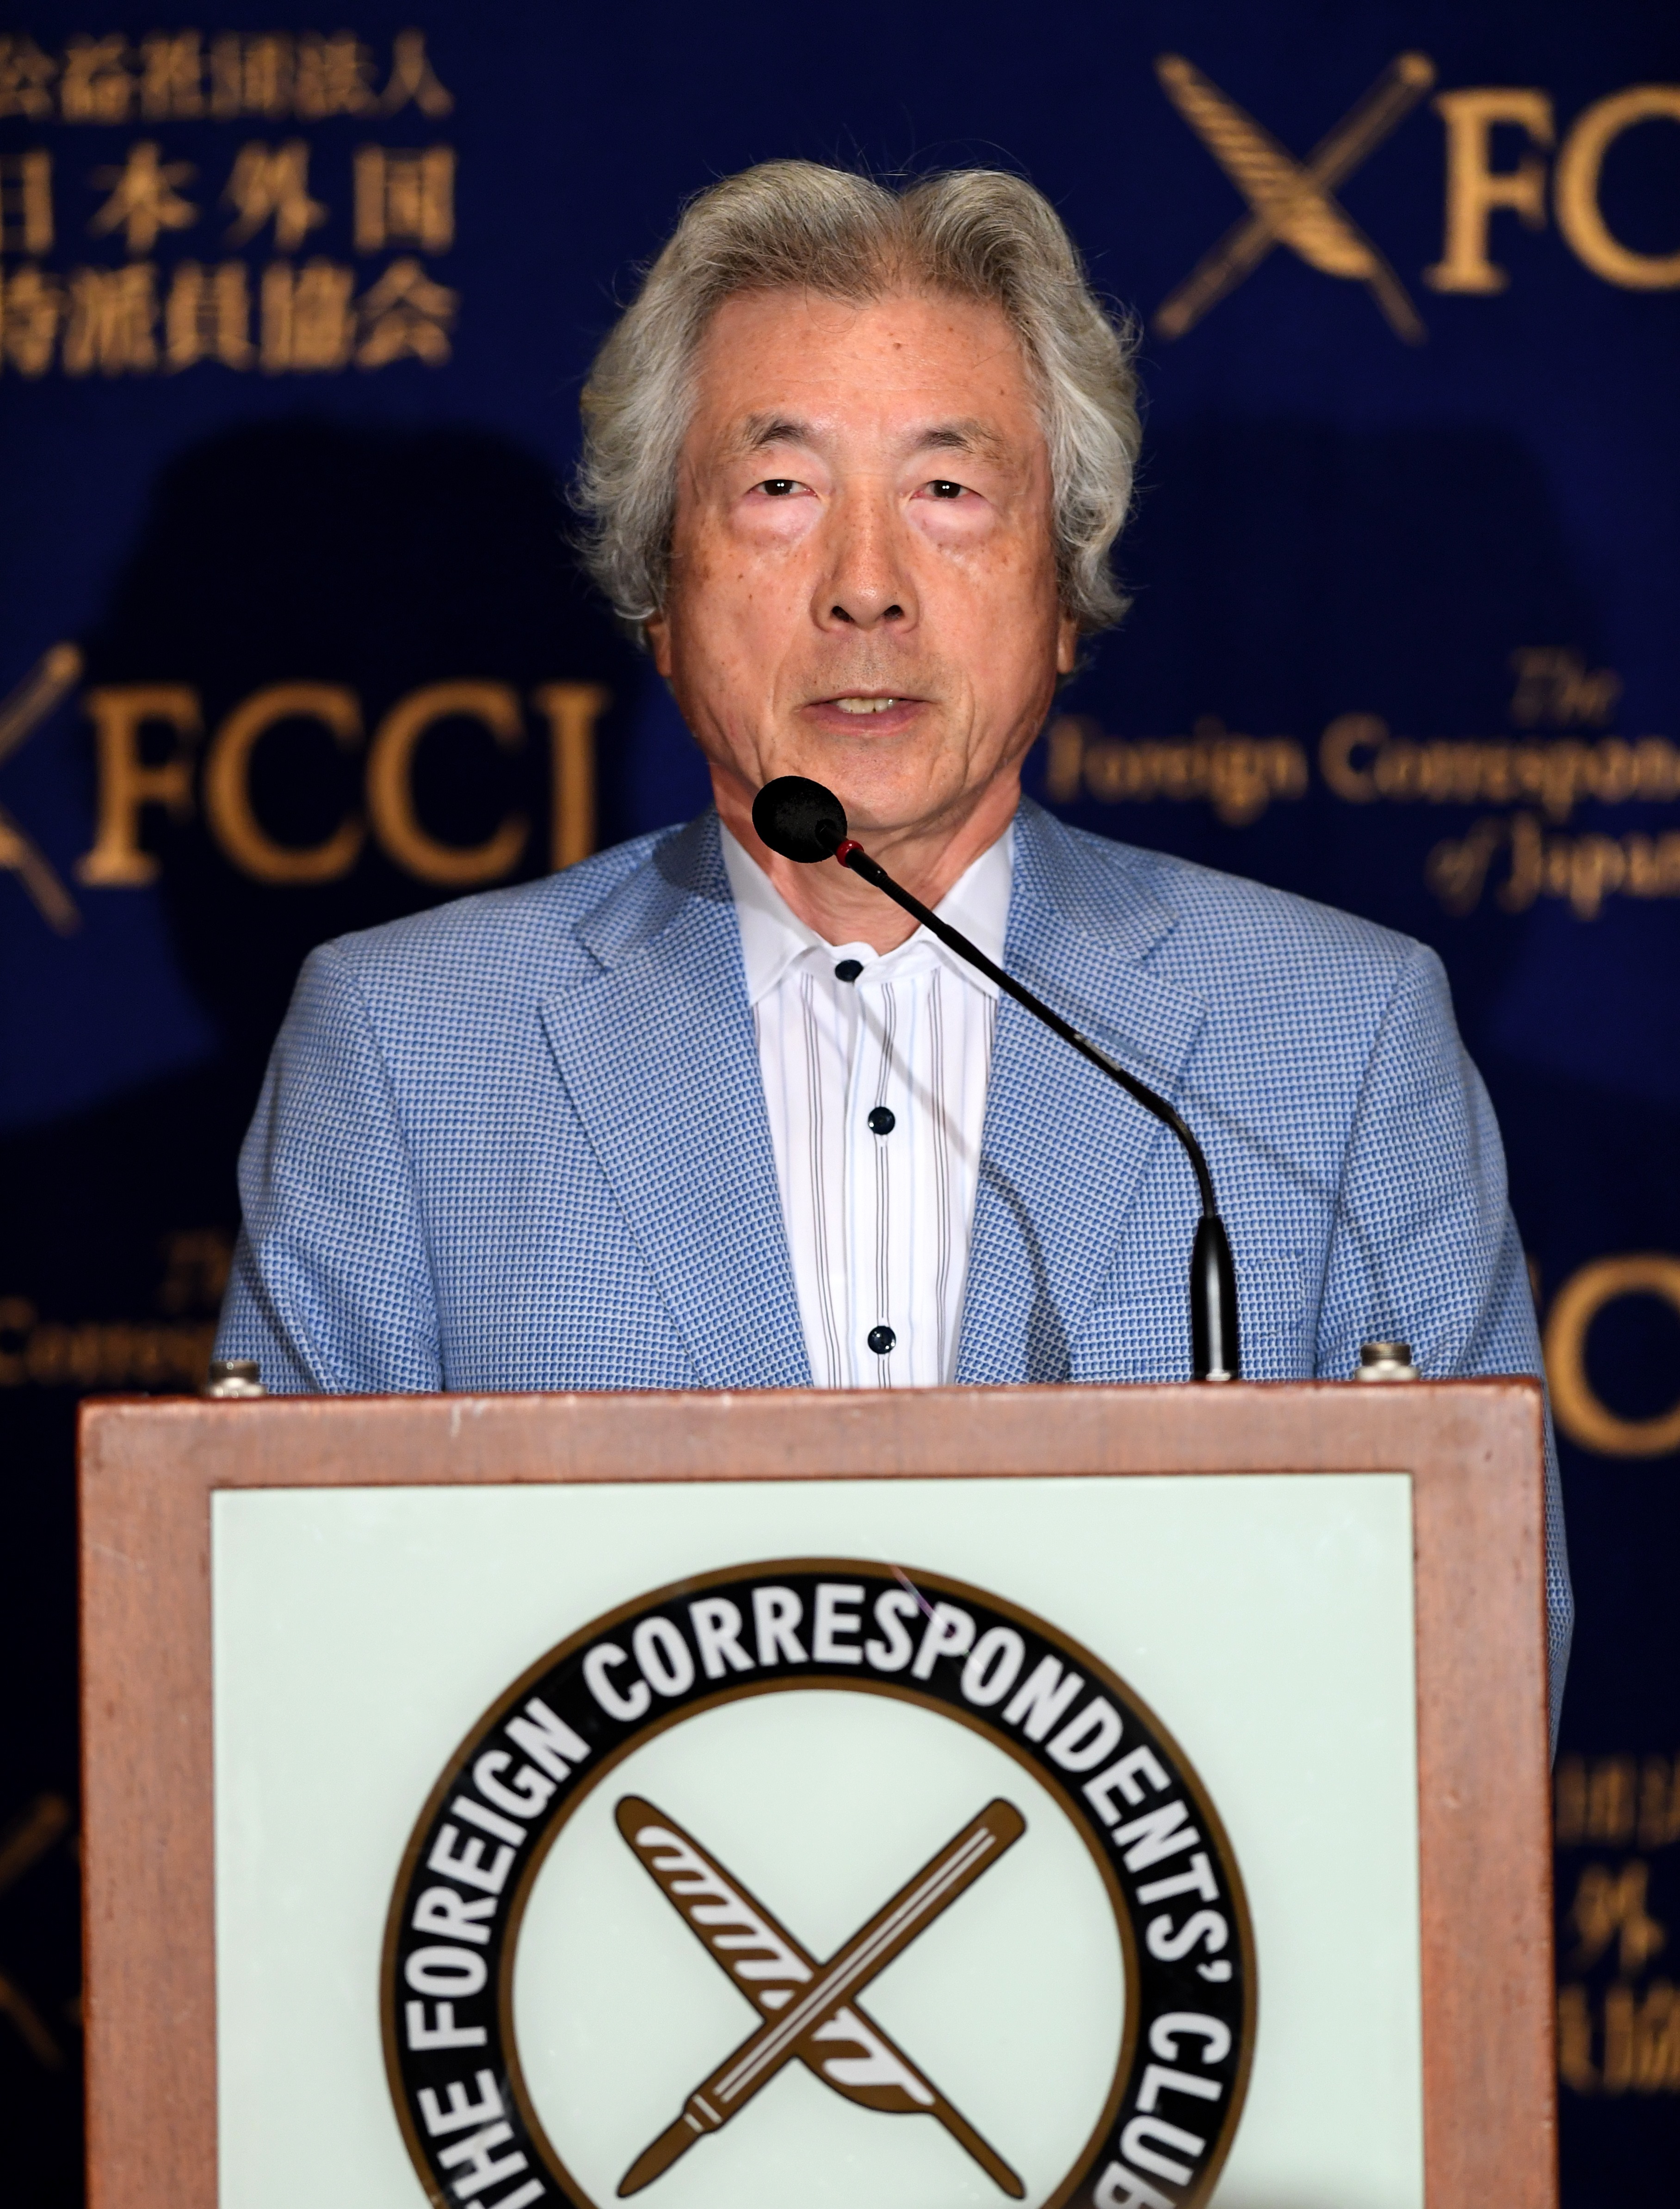 Former Japanese prime minister Junichiro Koizumi addresses a press conference at the Foreign Correspondents' Club of Japan in Tokyo on September 7, 2016. Former Japanese leader Junichiro Koizumi on September 7 accused current Prime Minister Shinzo Abe of lying when he claimed the stricken Fukushima nuclear facility was "under control." / AFP PHOTO / TOSHIFUMI KITAMURA